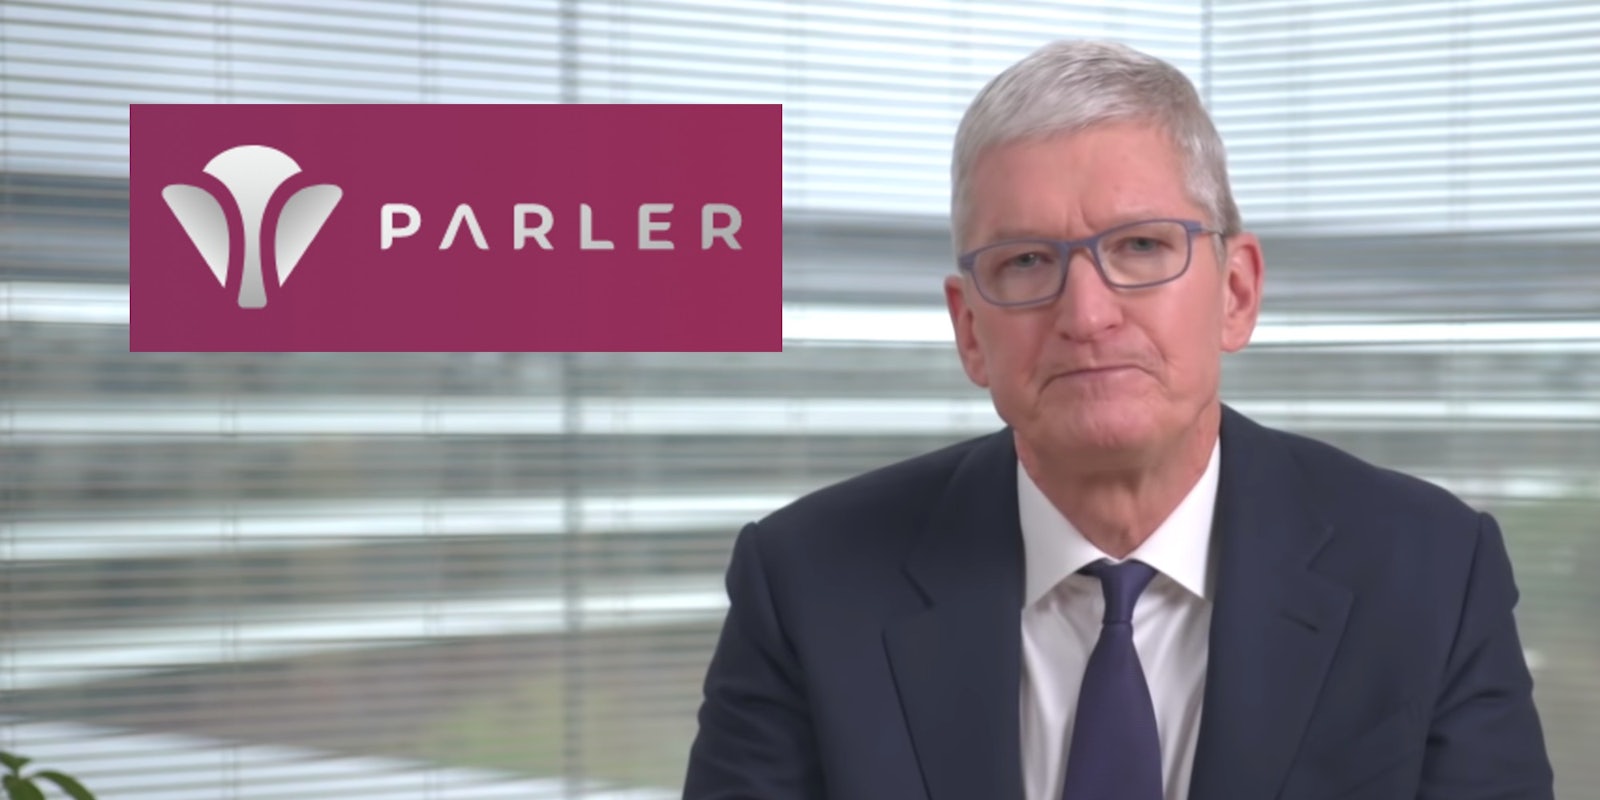 Apple CEO Tim Cook next to the Parler logo